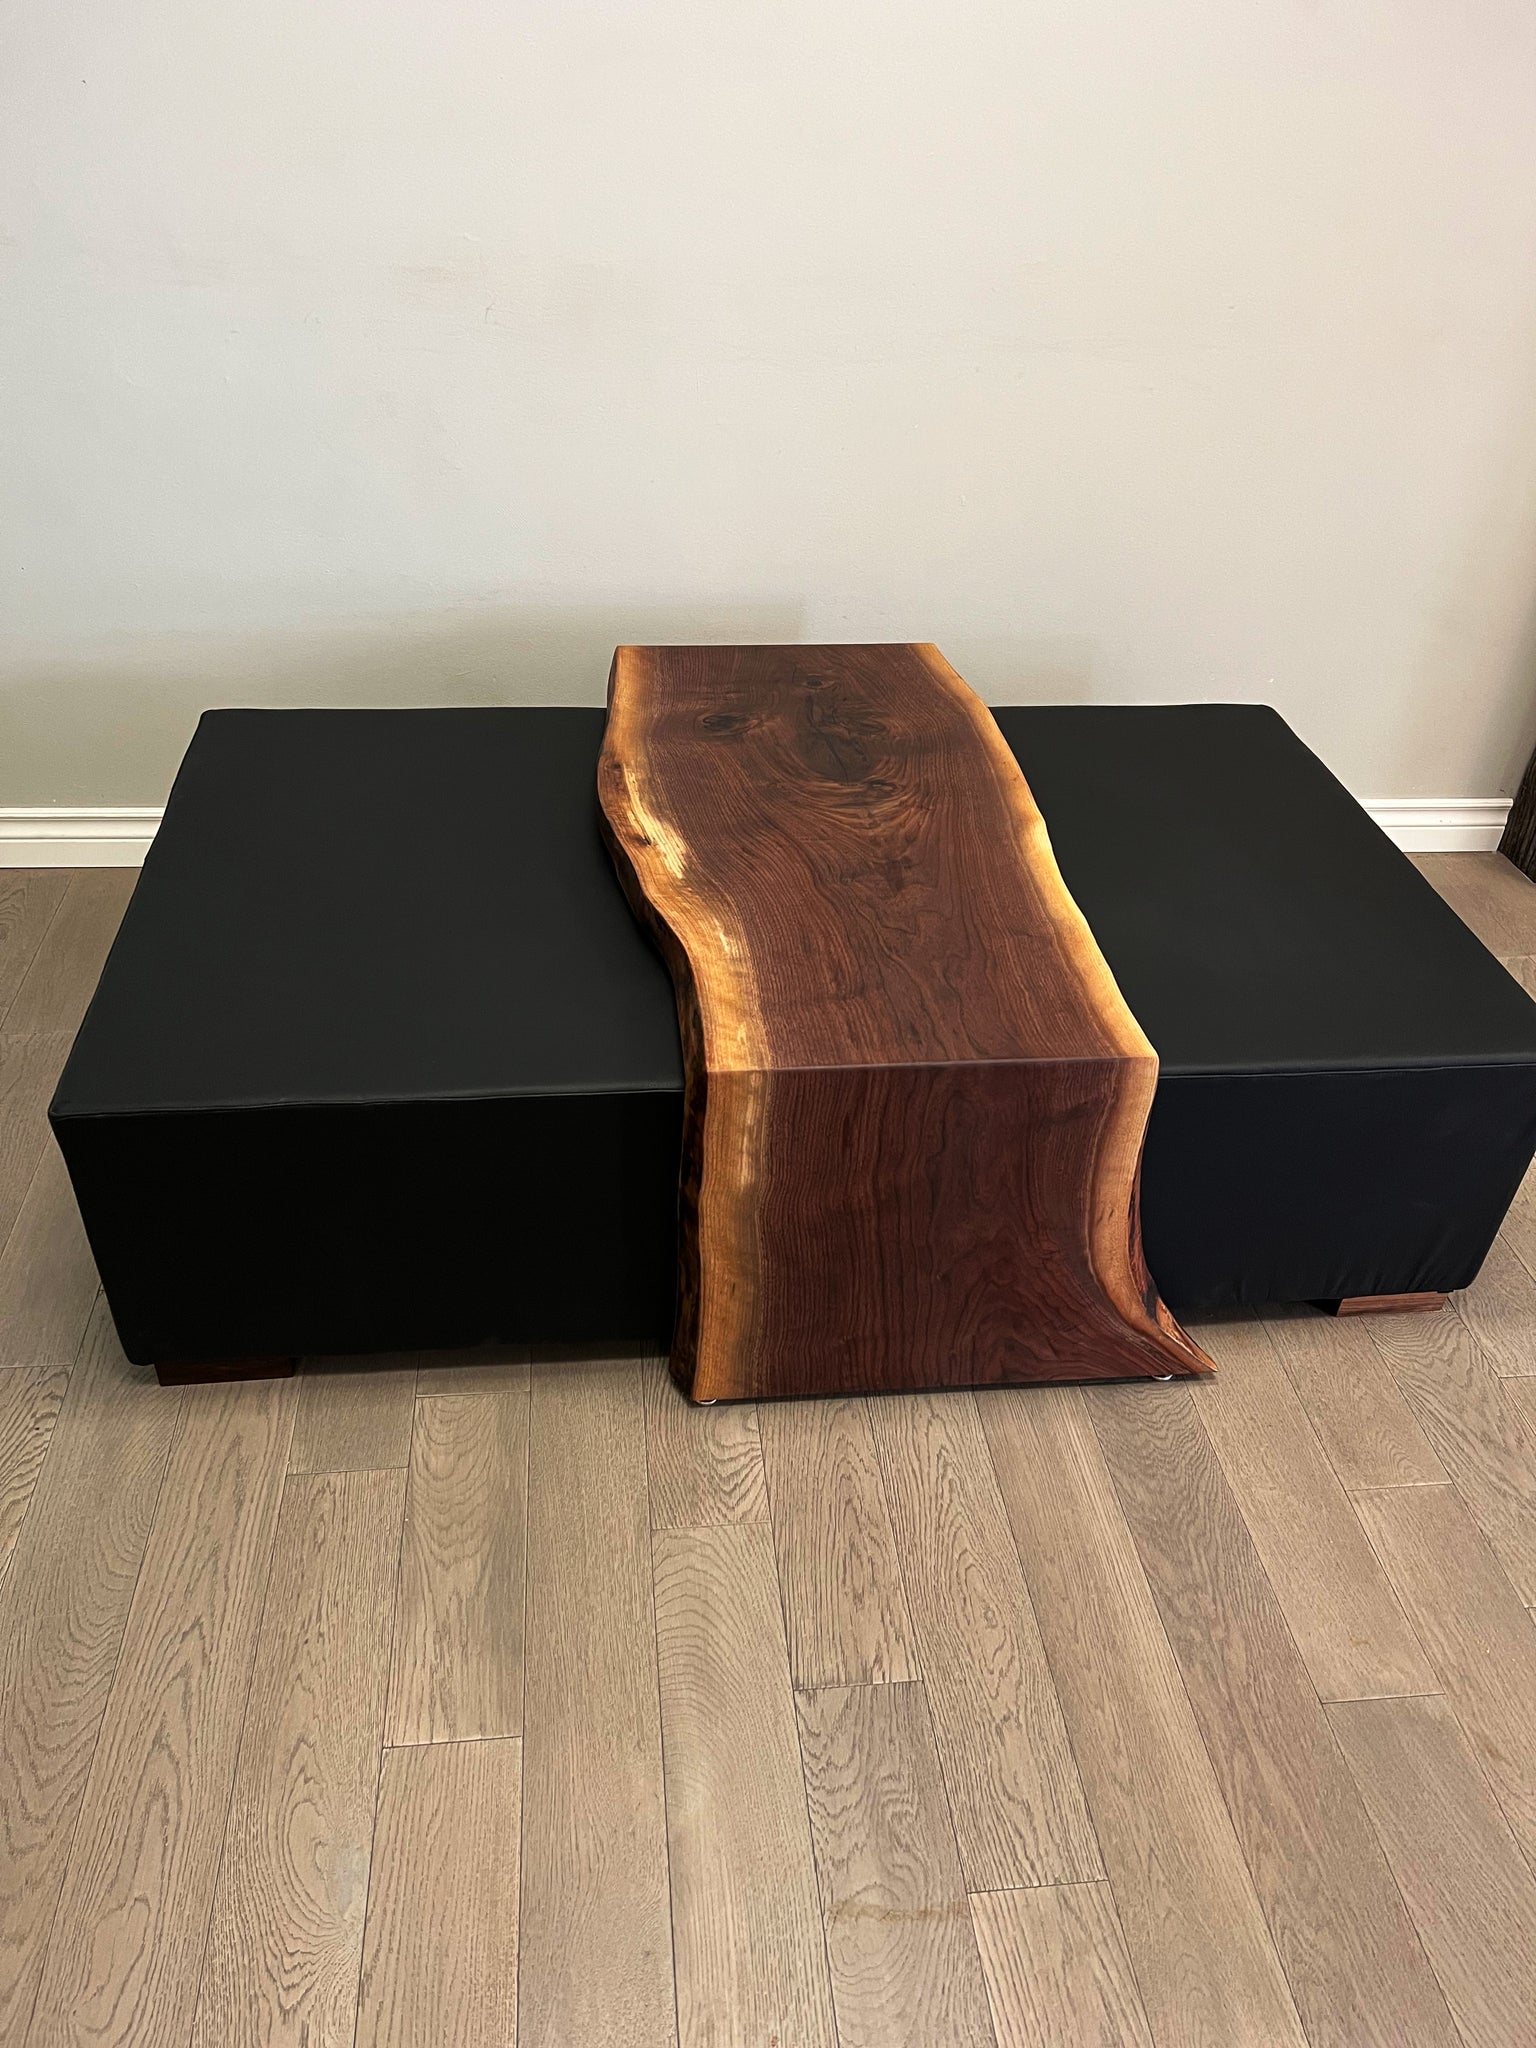 Ottoman with solid wood coffee table